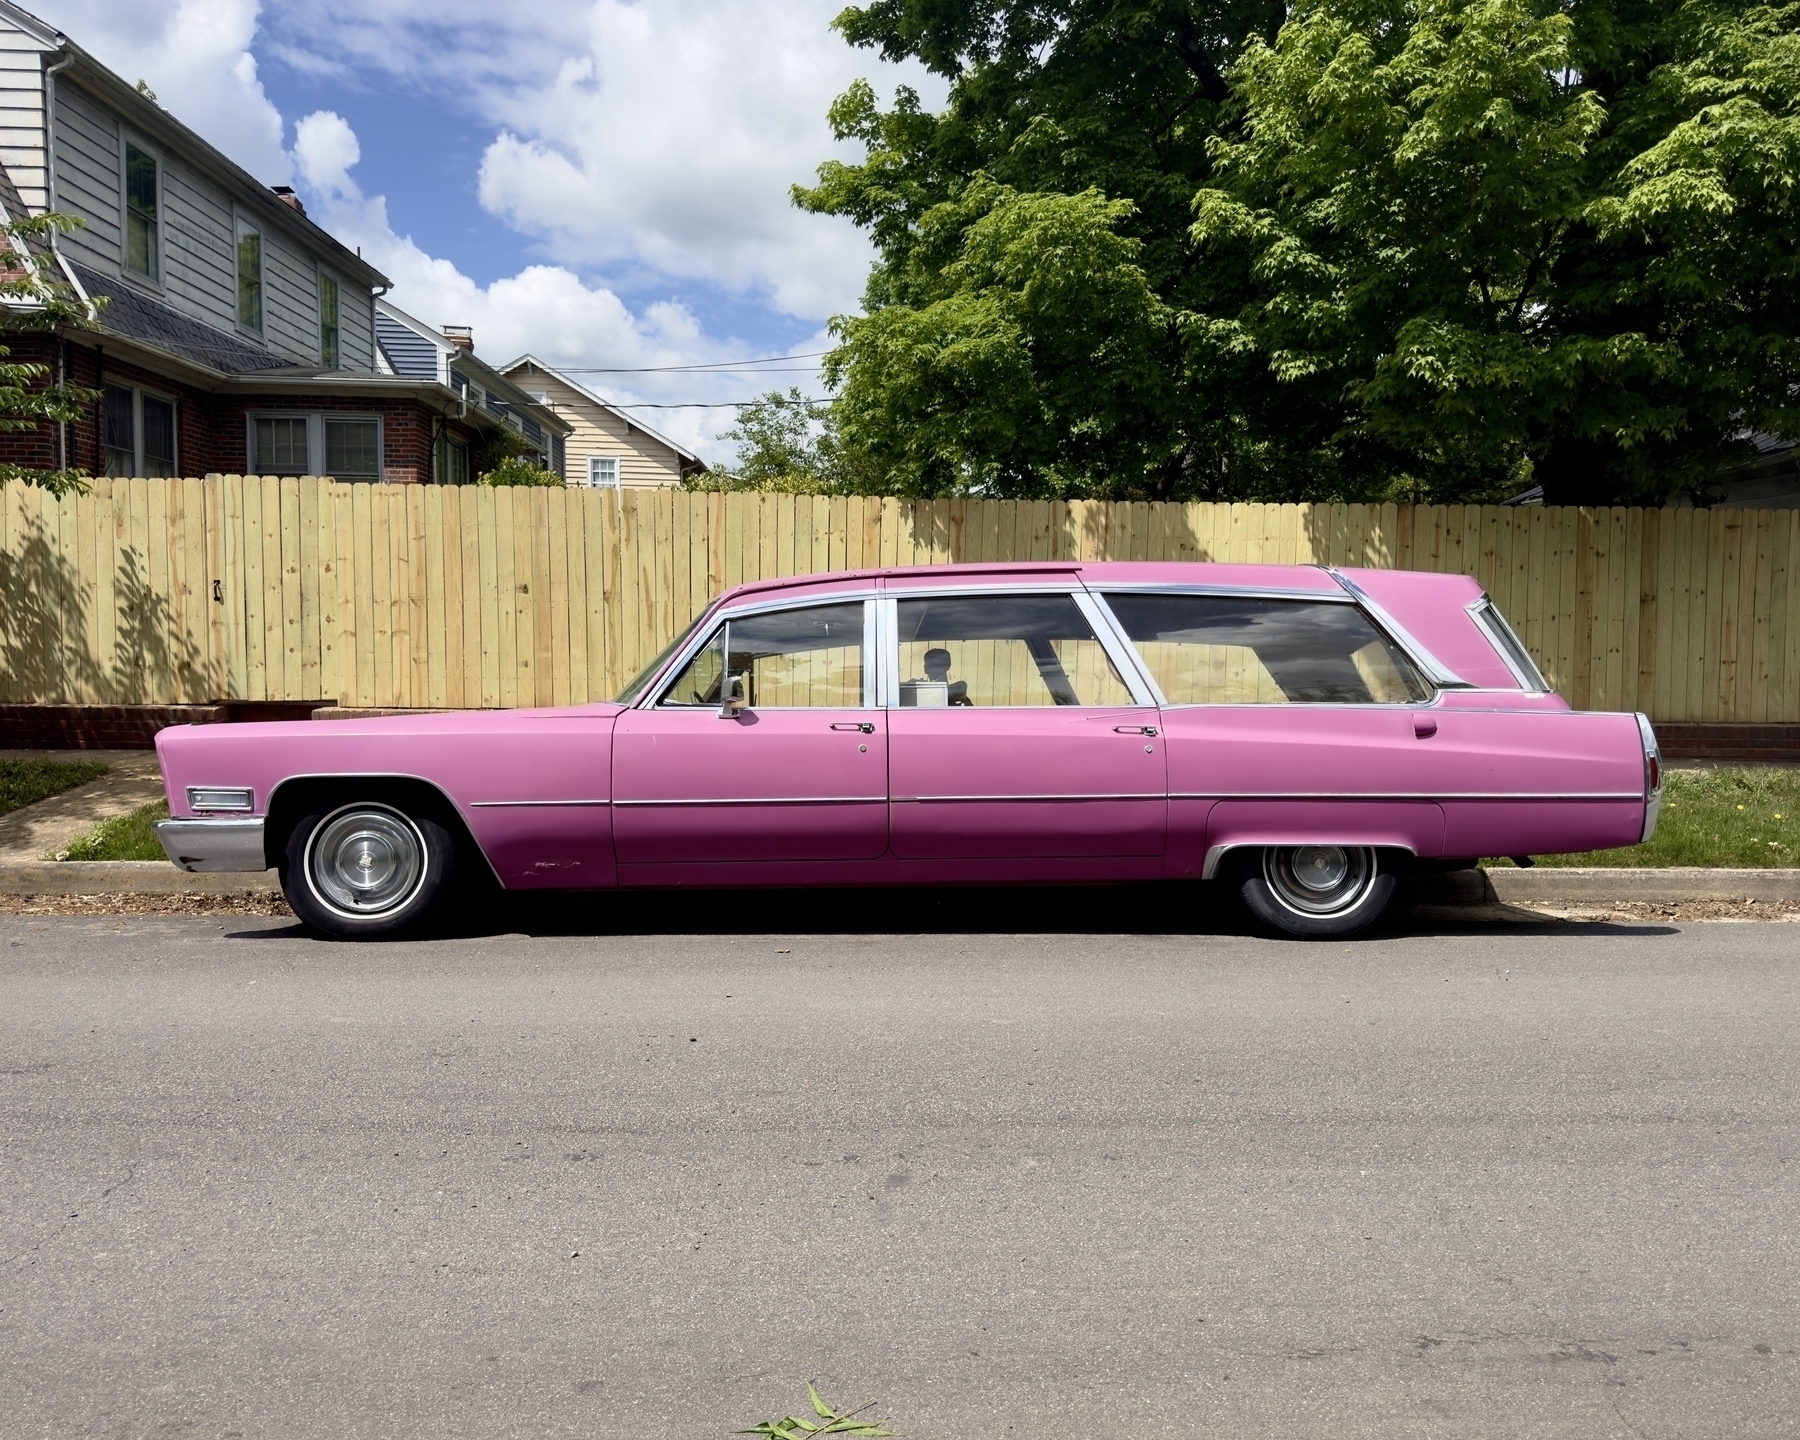 A pink Cadillac hearse with a fake skeleton in the back